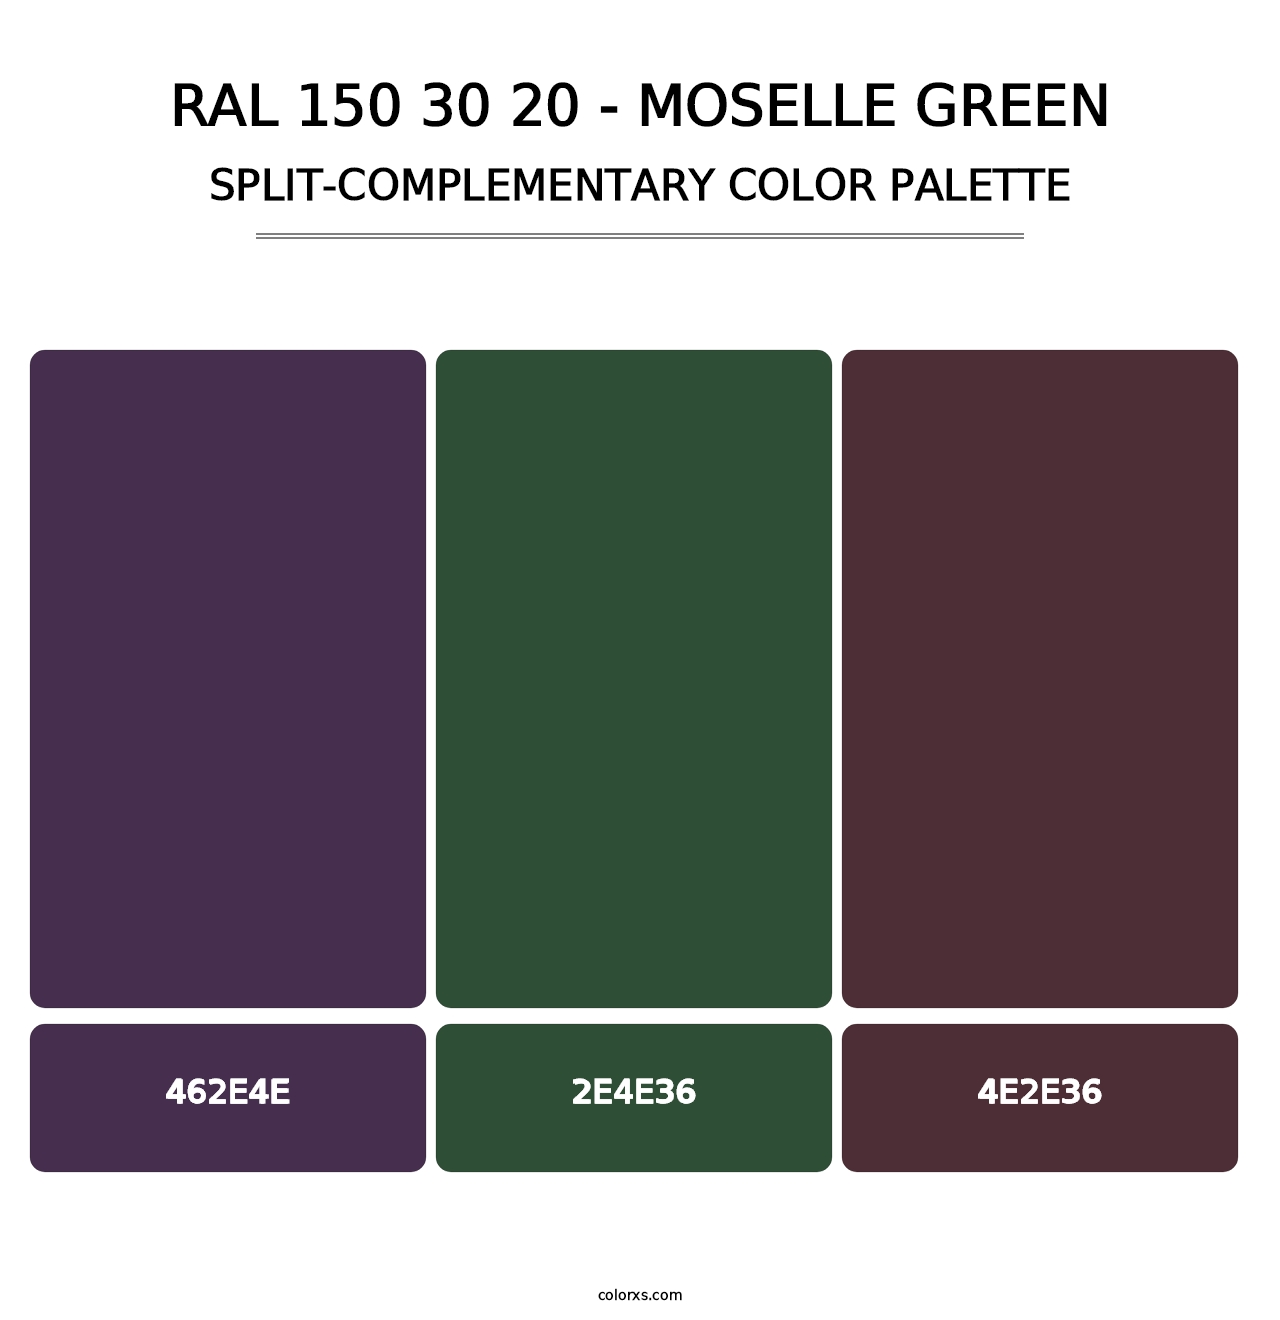 RAL 150 30 20 - Moselle Green - Split-Complementary Color Palette